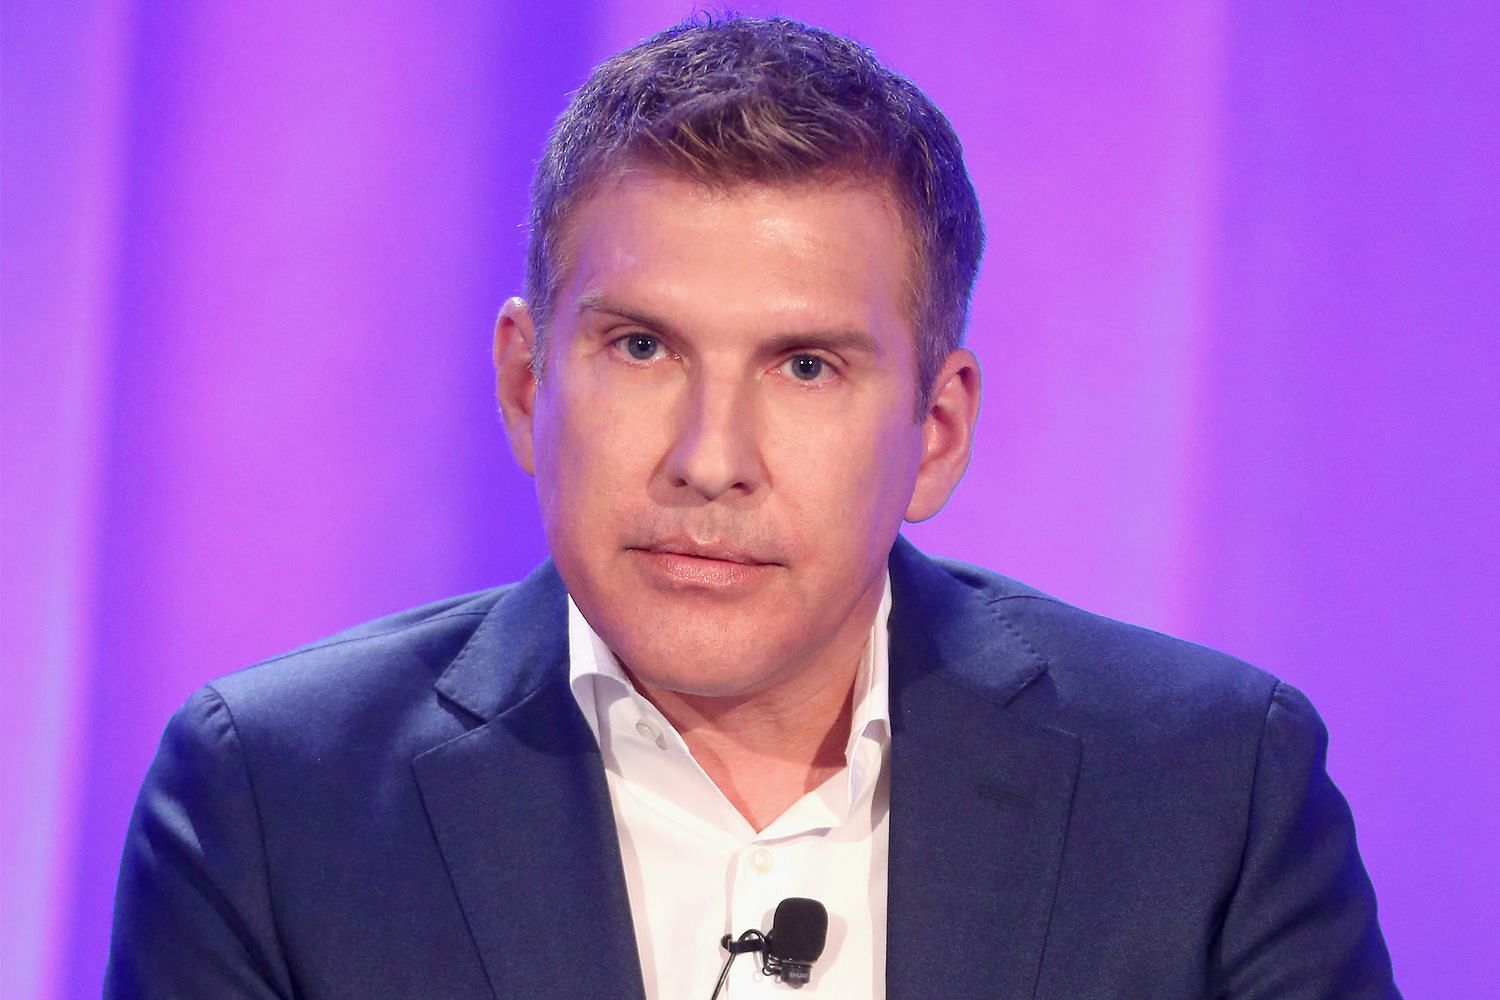 Todd Chrisley revealed details about his time in prison during a recent interview. (Image via USA Network)